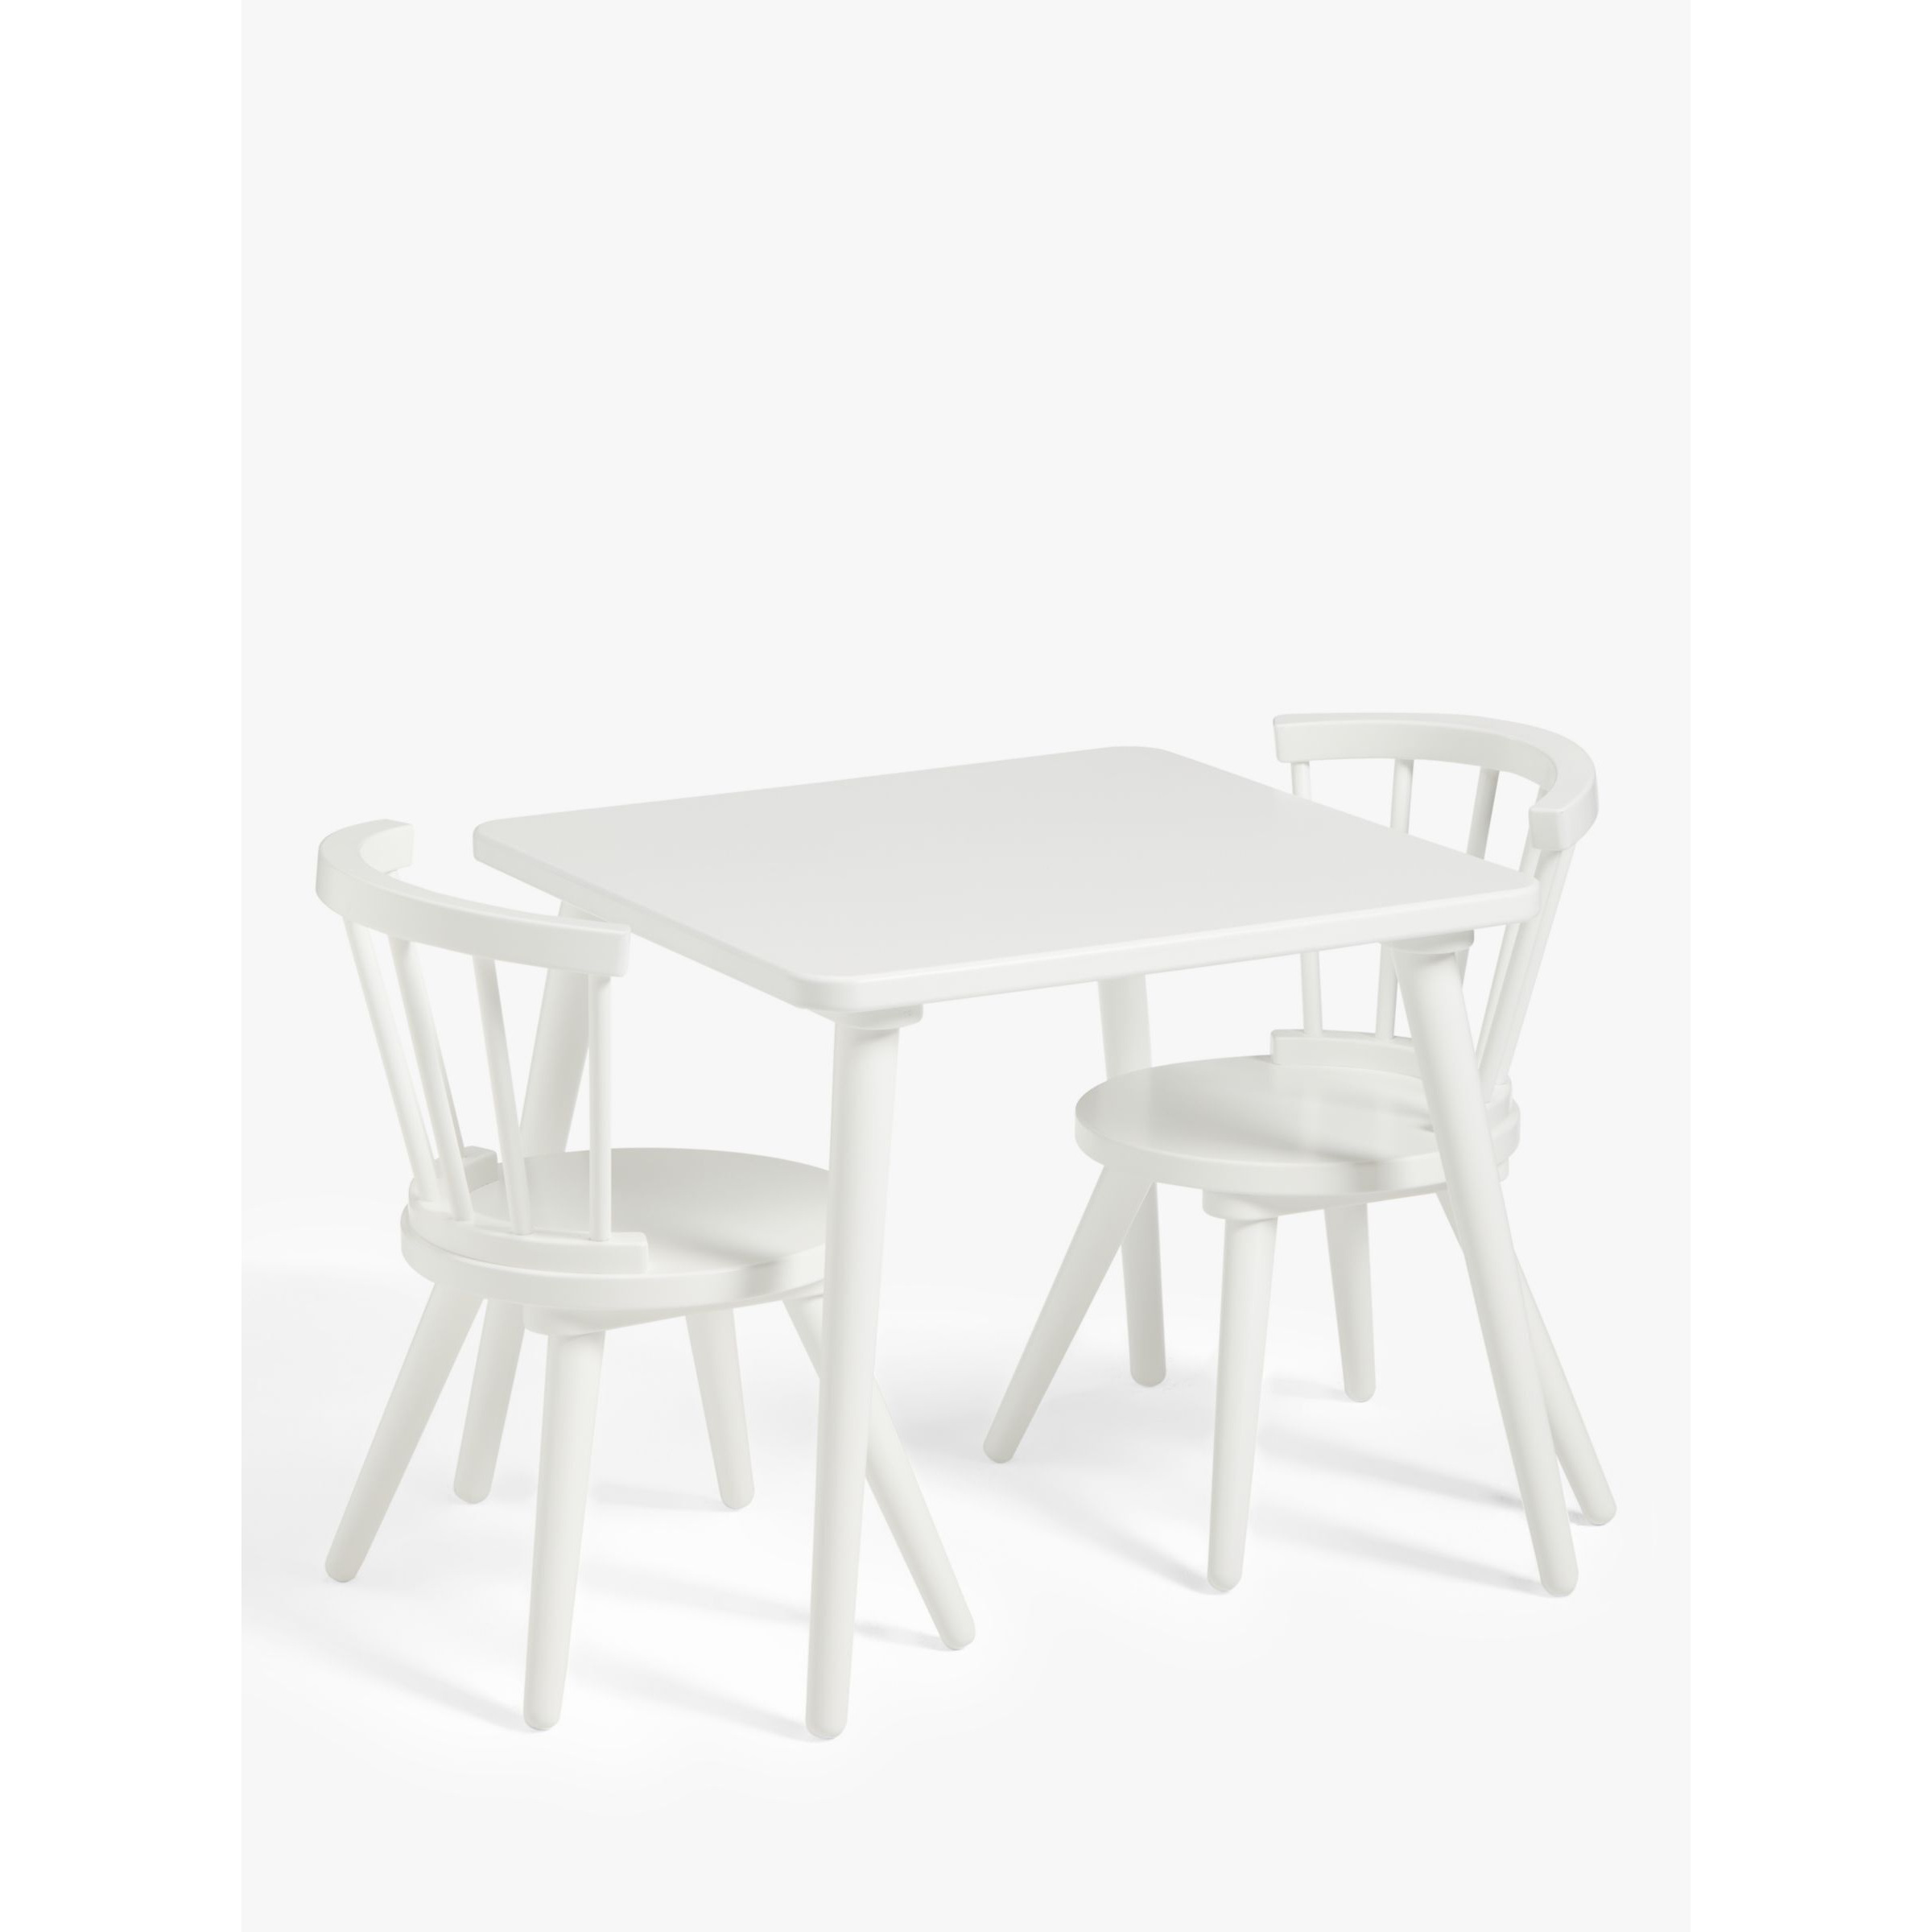 John Lewis Kids' Spindle Table and Chairs Set, White - image 1